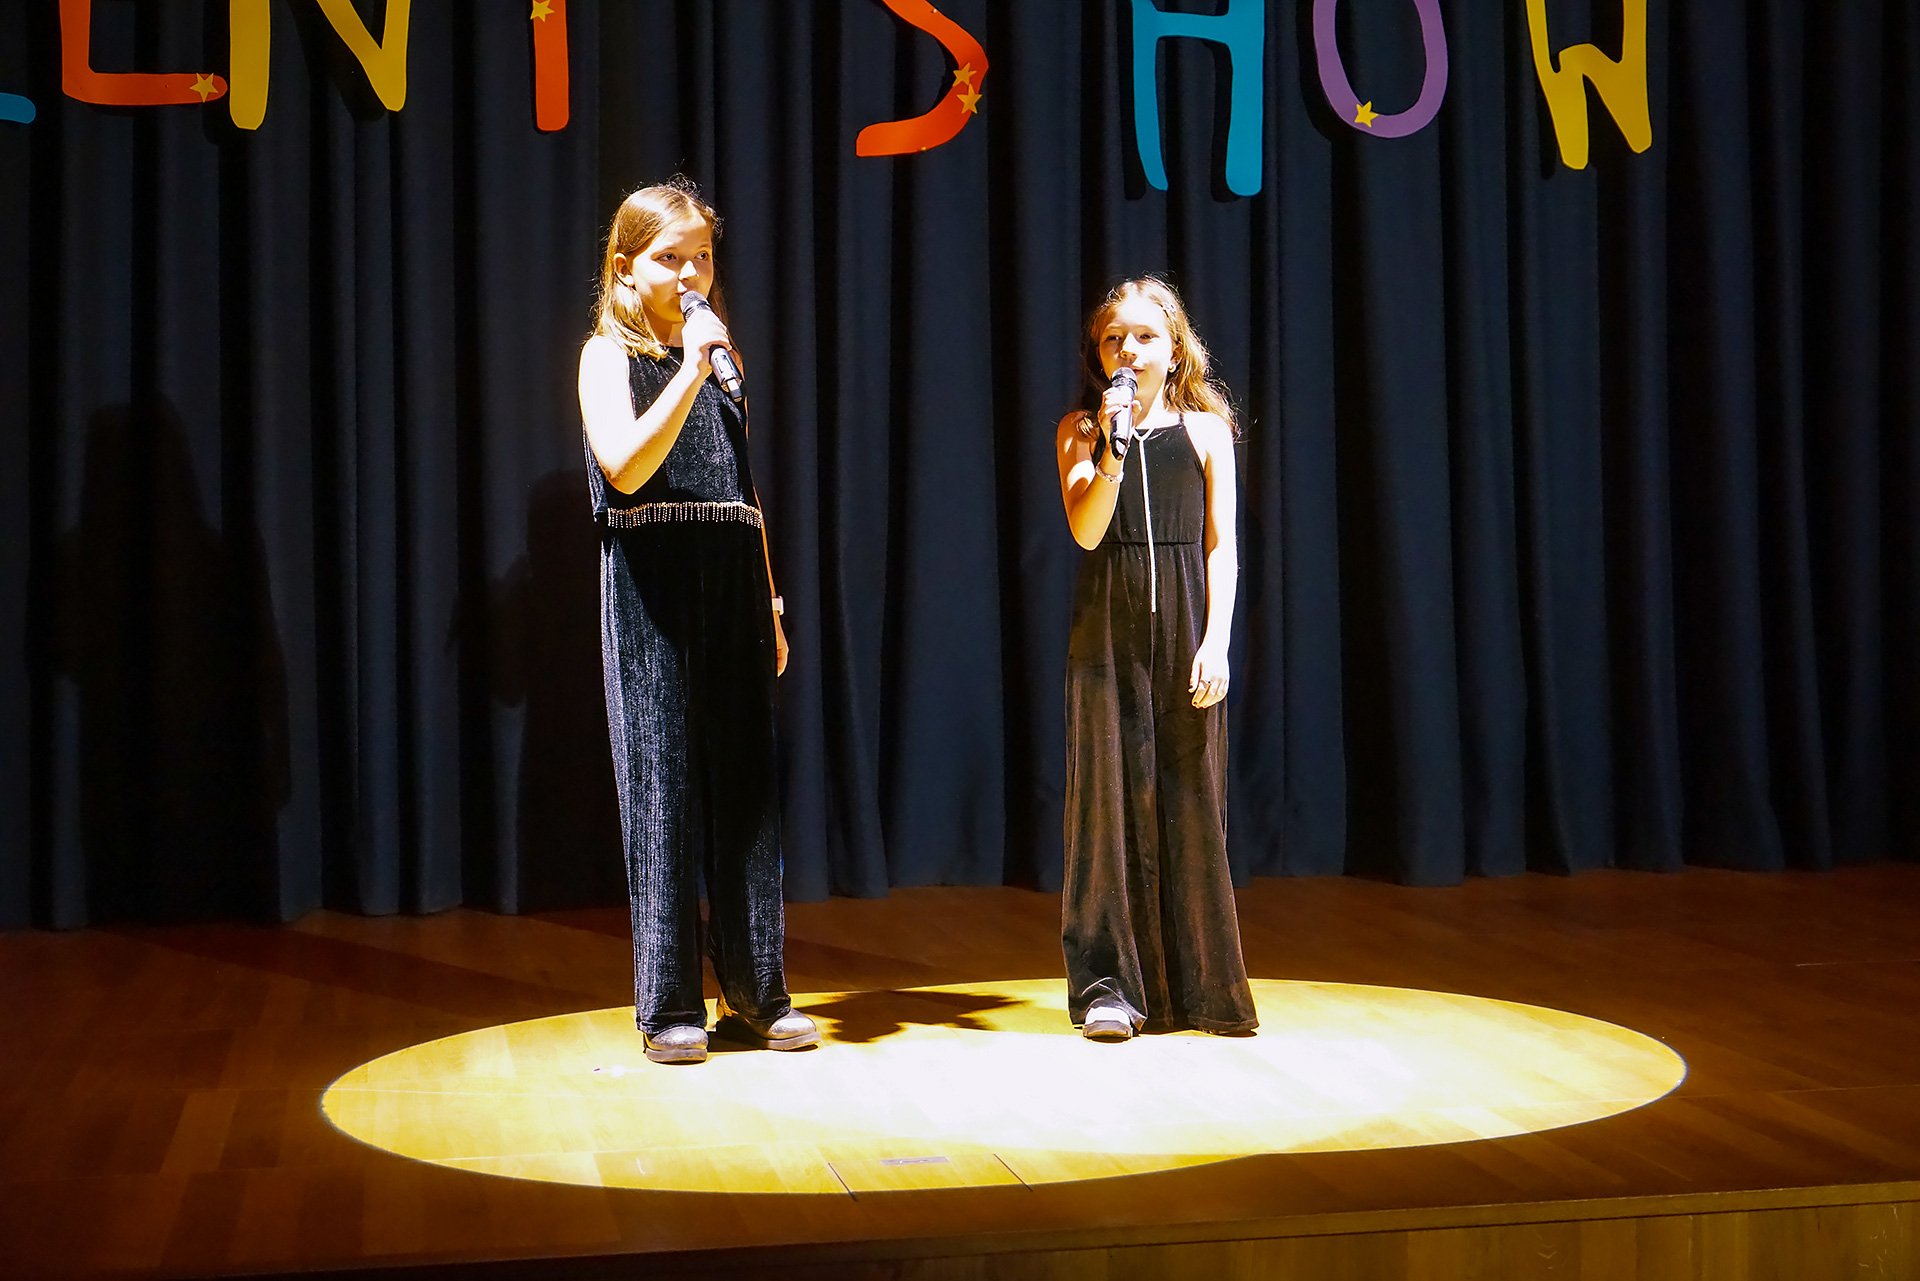 Primary Talent Show